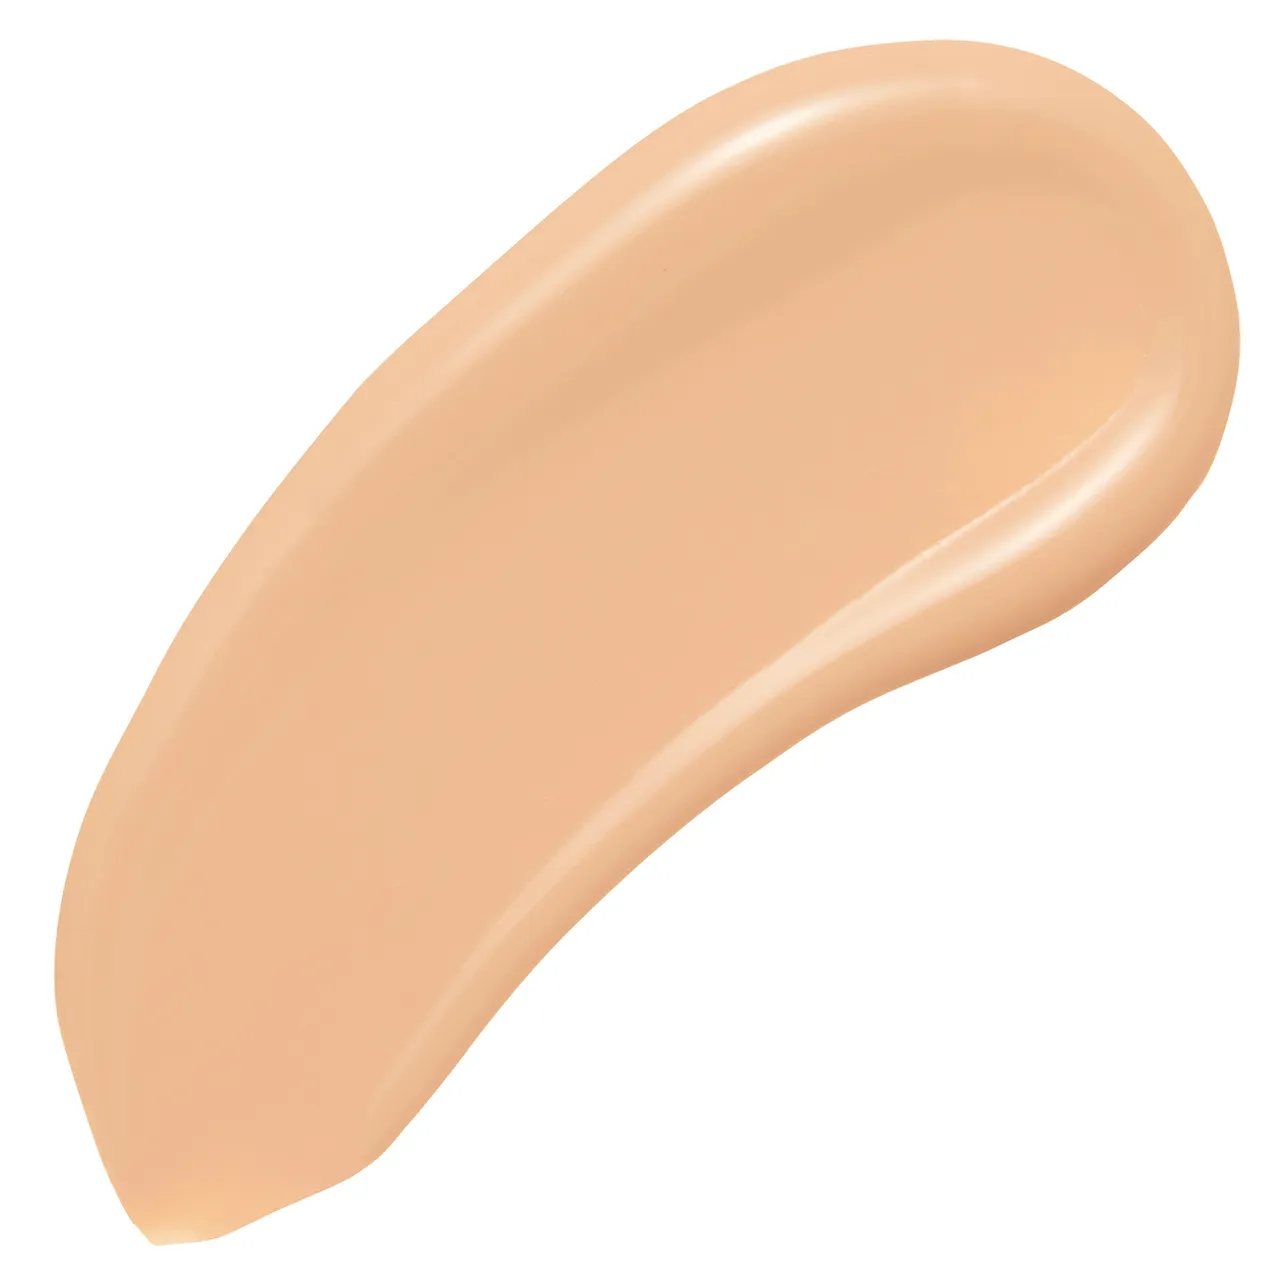 Maybelline Fit Me! Matte and Poreless Foundation 30ml (Various Shades) - 112 Soft Beige